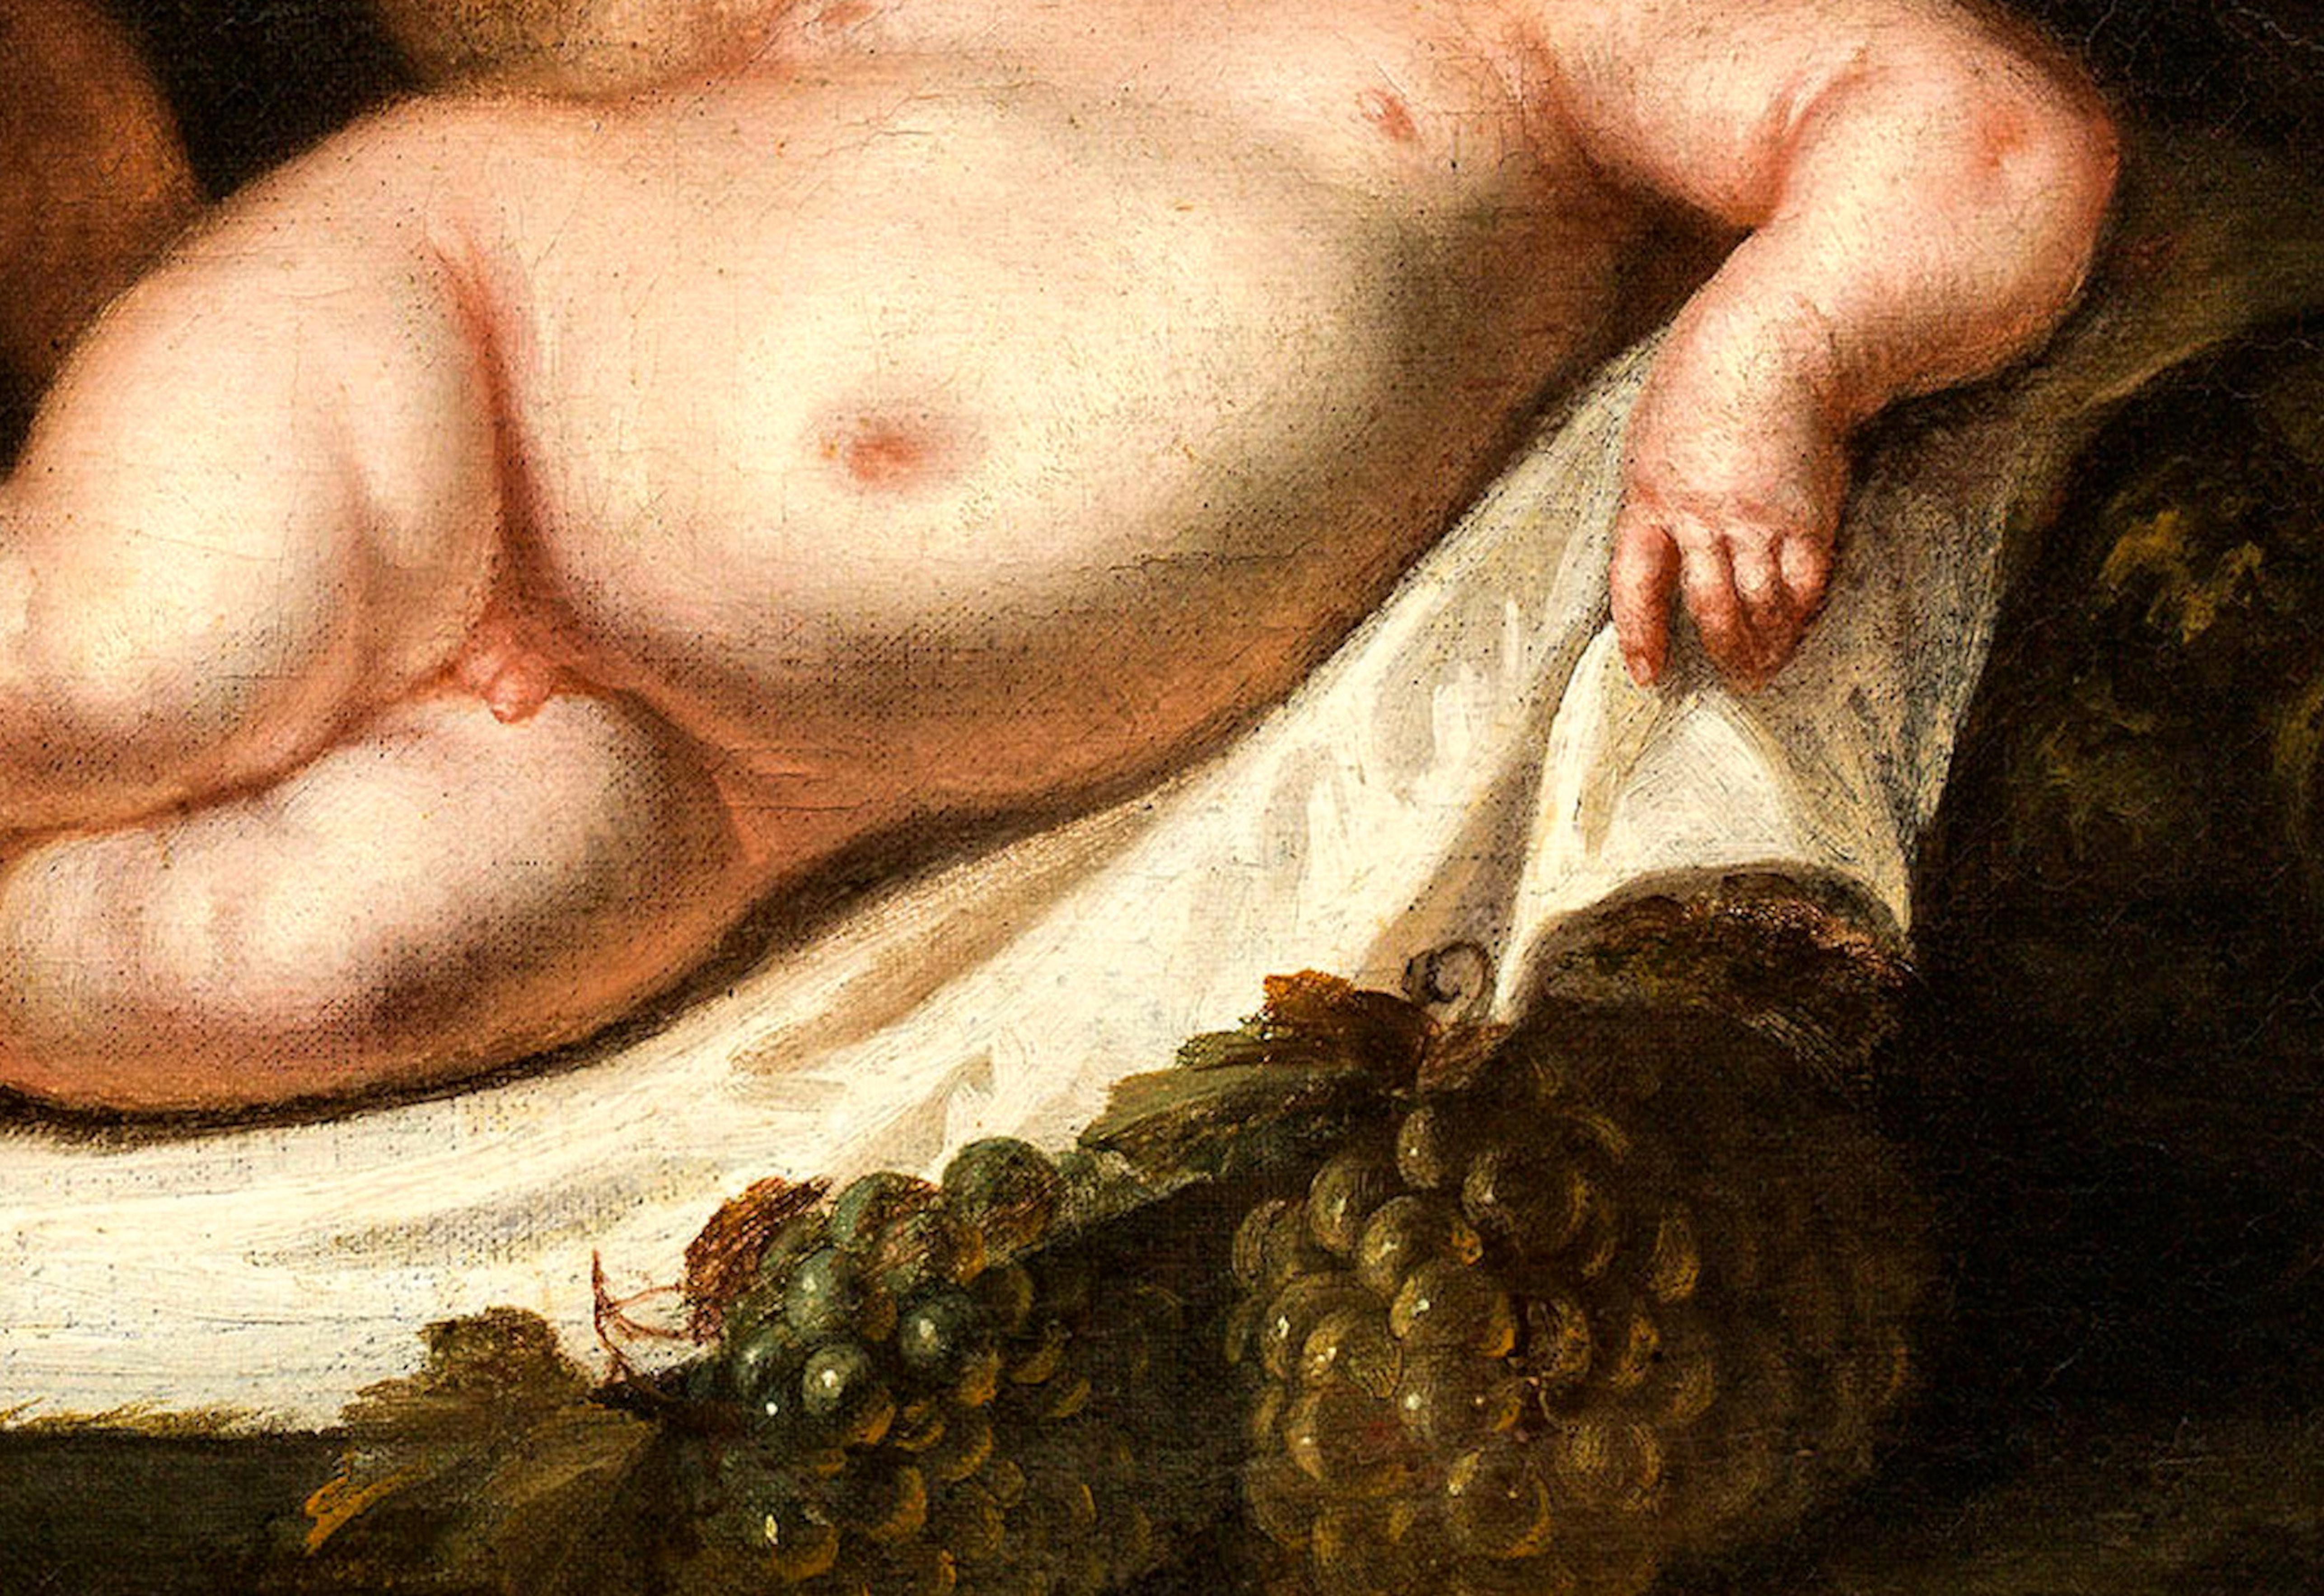 he painted “bacchus” during his 1595 journey and represents his interpretation of naturalism.